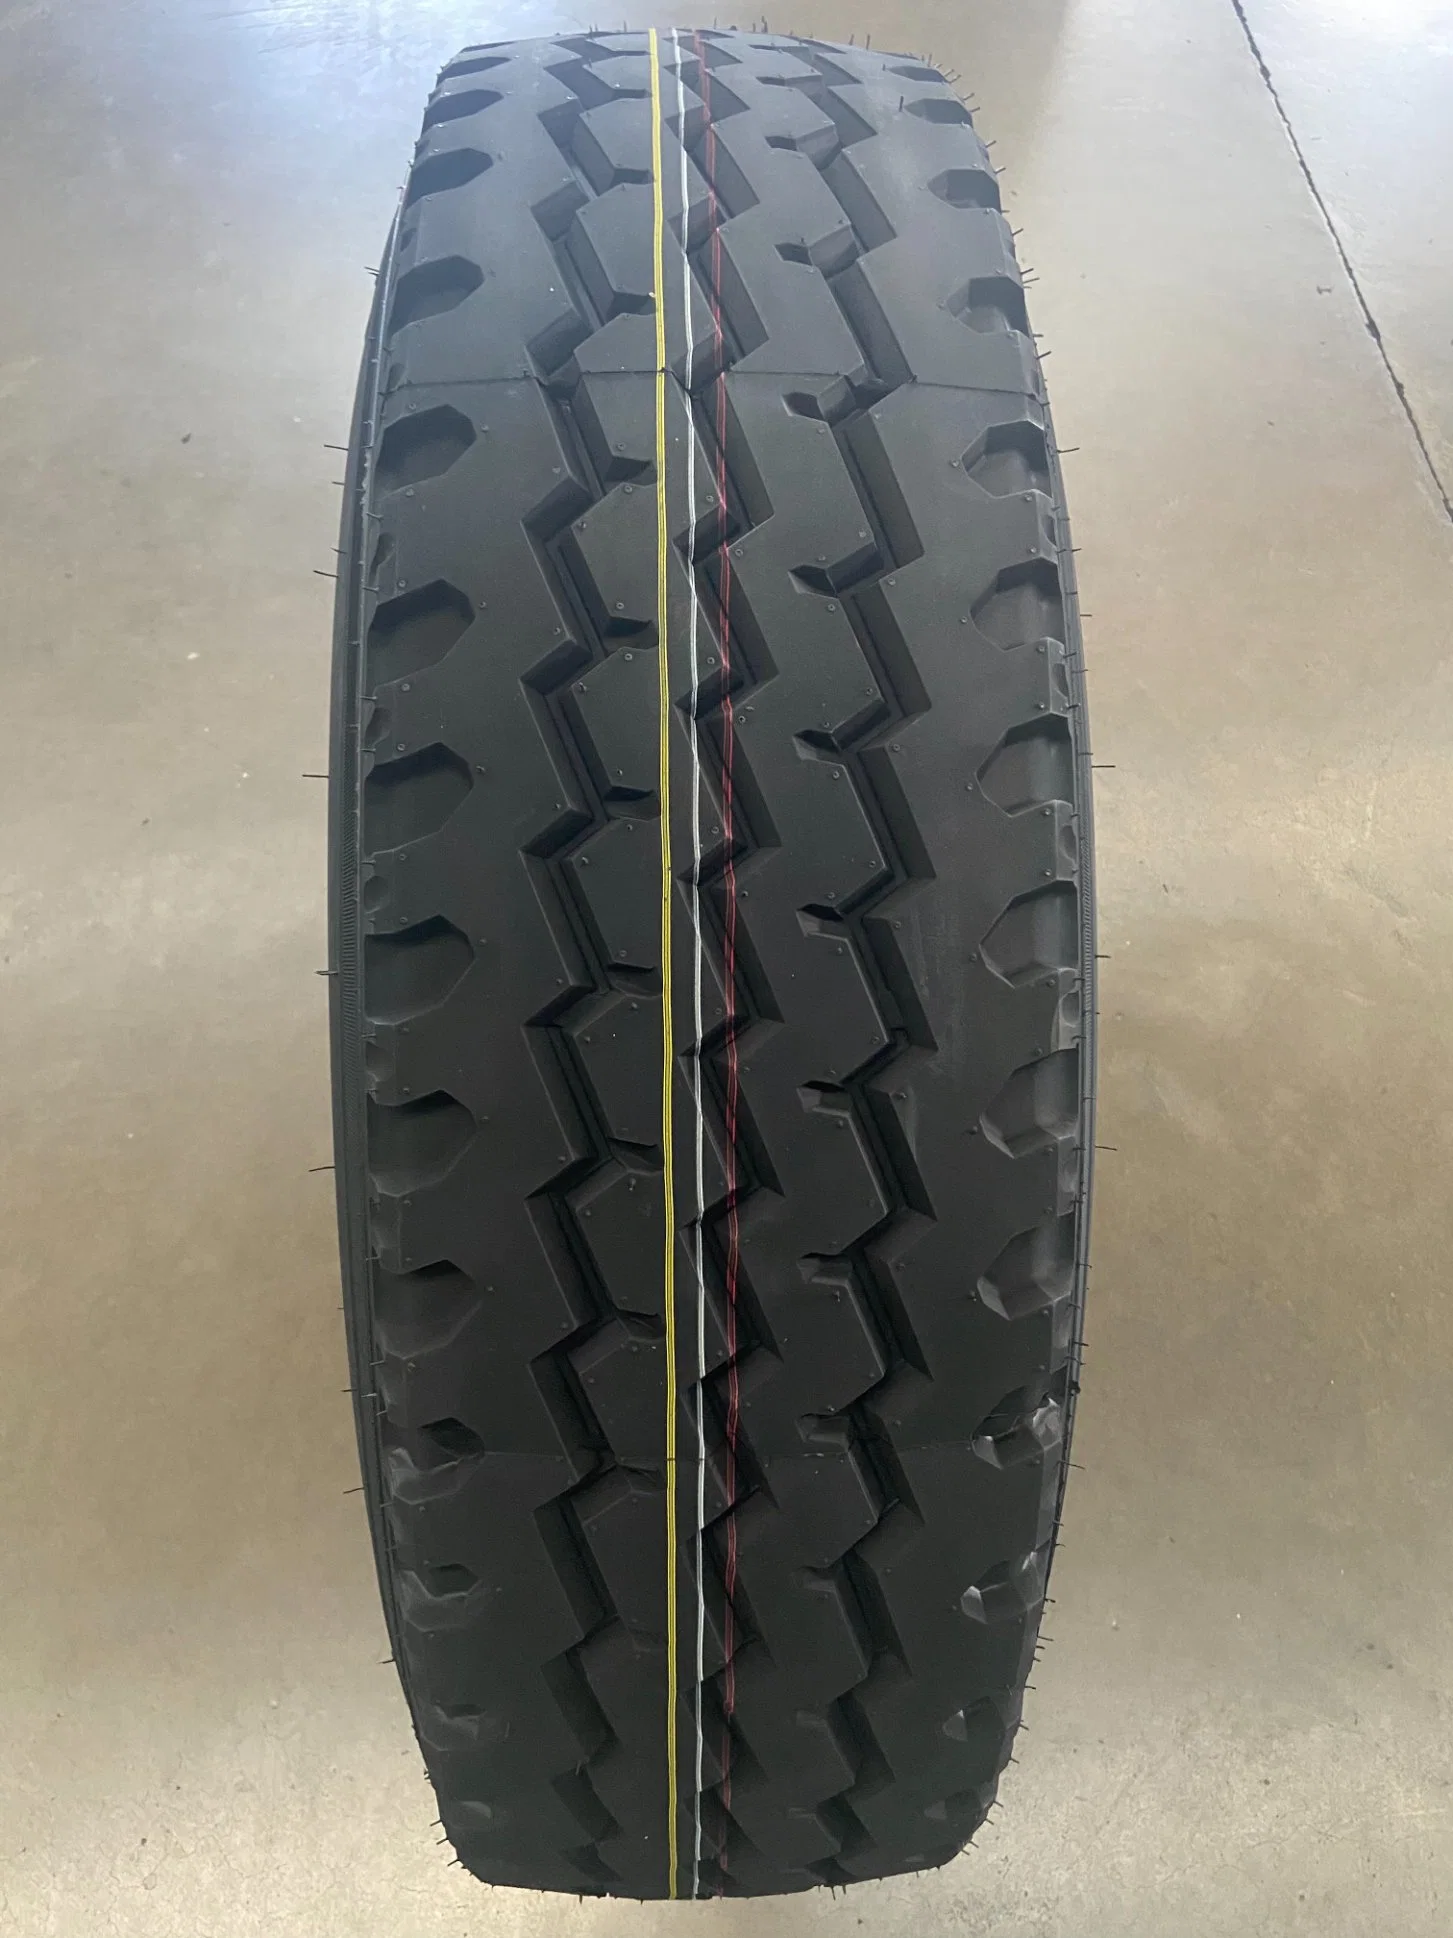 Radial TBR Tyres for Van Mini Bus Vehicles Ply Light Truck Tire Not Used Truck Tires 11r22.512.00r24 Price